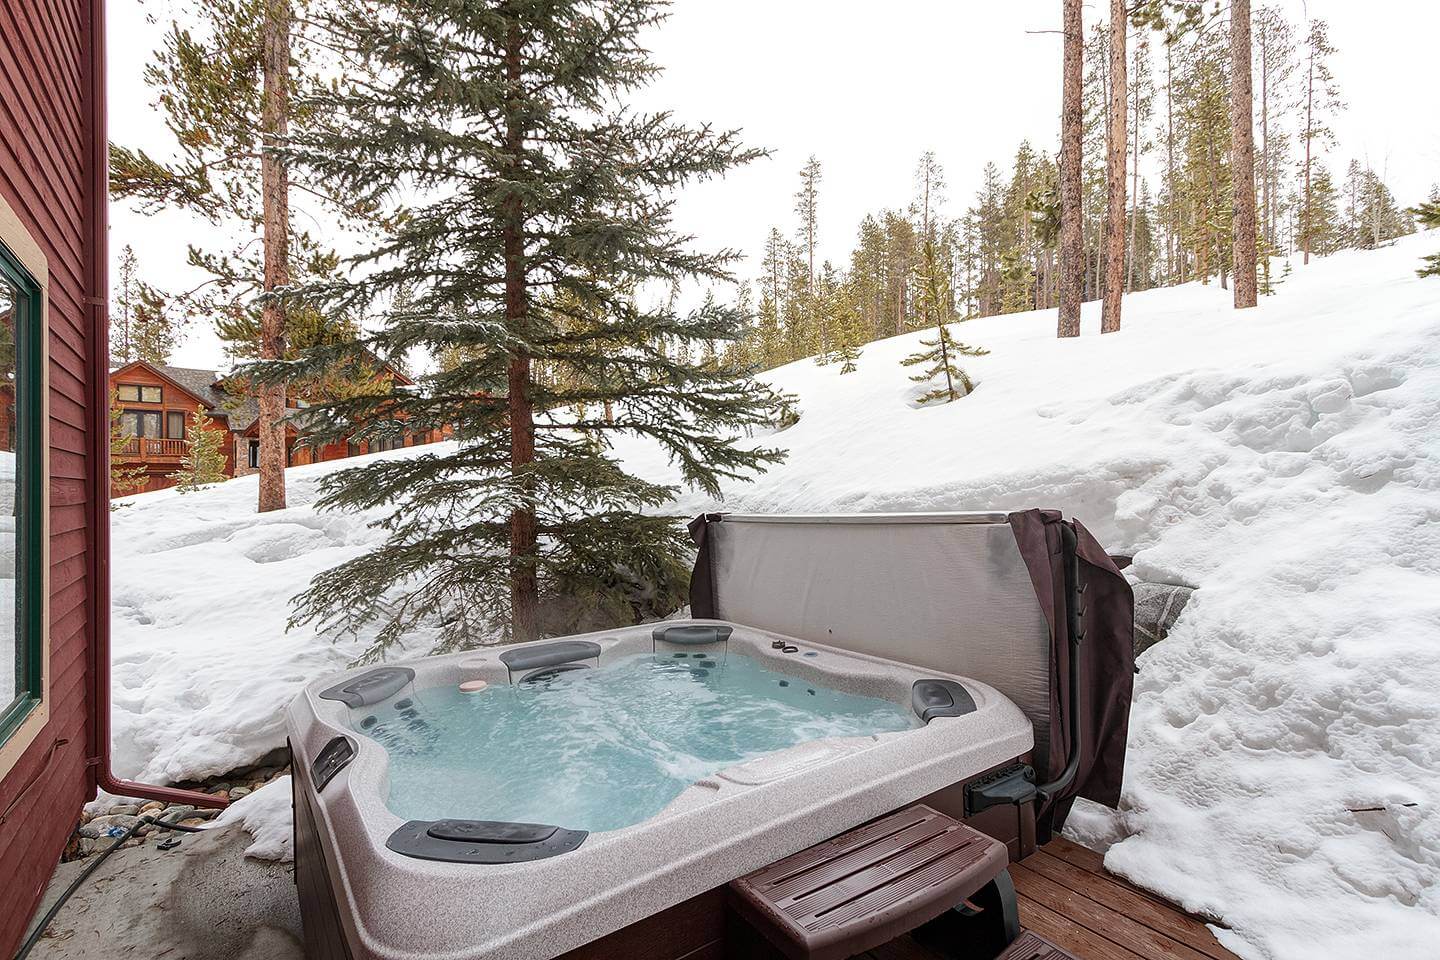 snowy hot tub view at twilight lookout vacation rental property in breckenridge